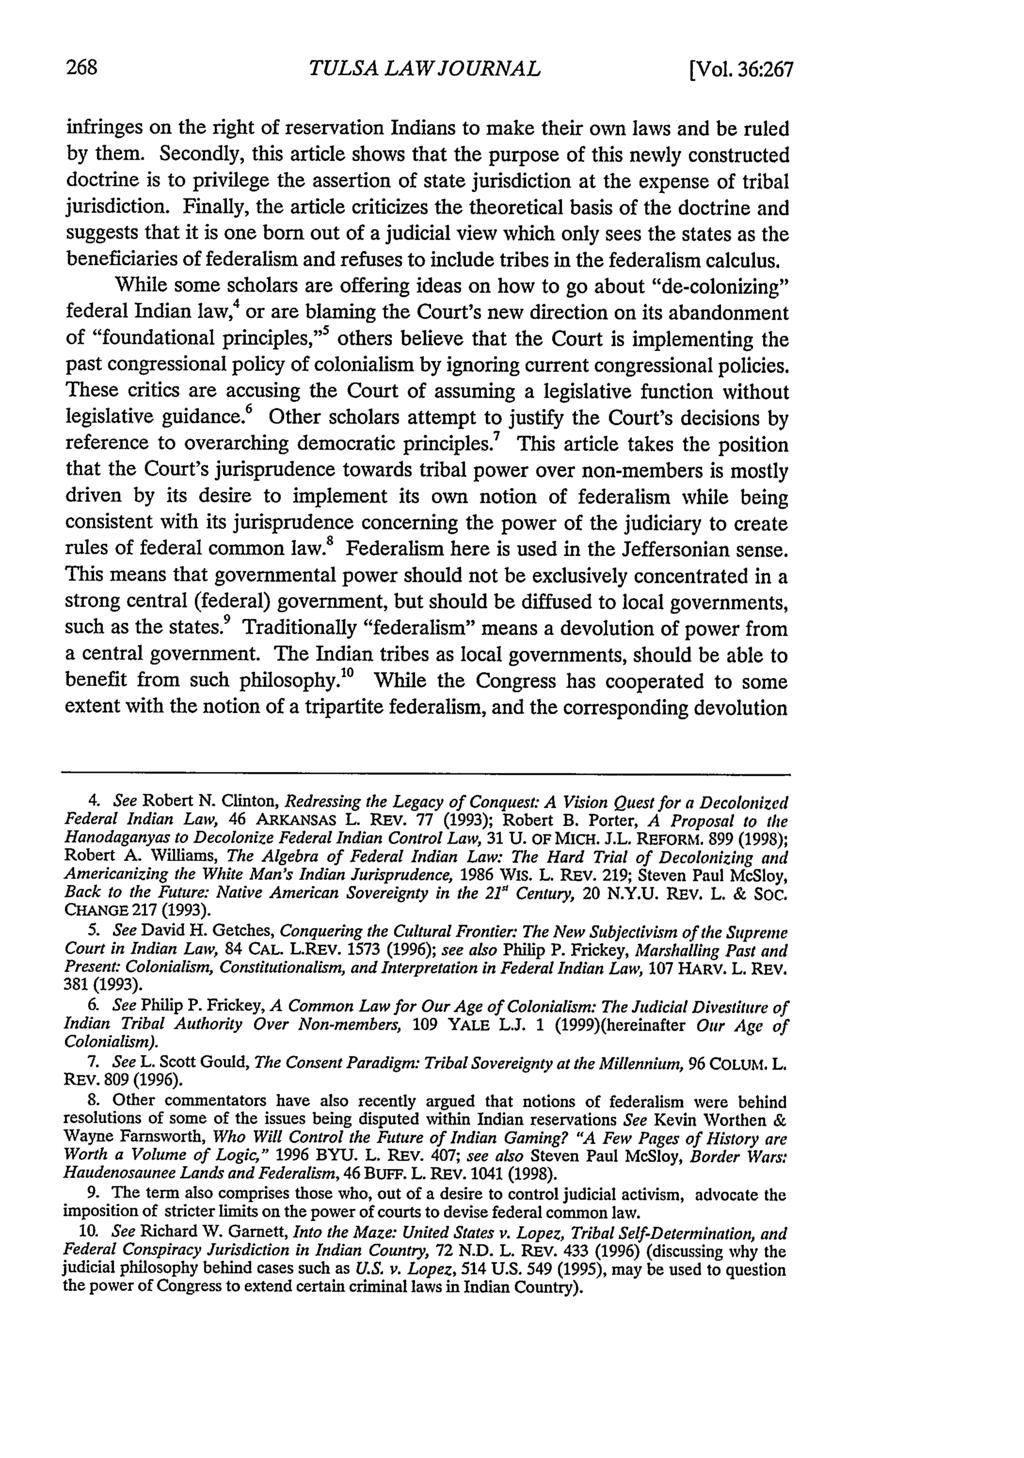 Tulsa Law Review, Vol. 36 [2000], Iss. 2, Art. 2 TULSA LAW JOURNAL [Vol. 36:267 infringes on the right of reservation Indians to make their own laws and be ruled by them.